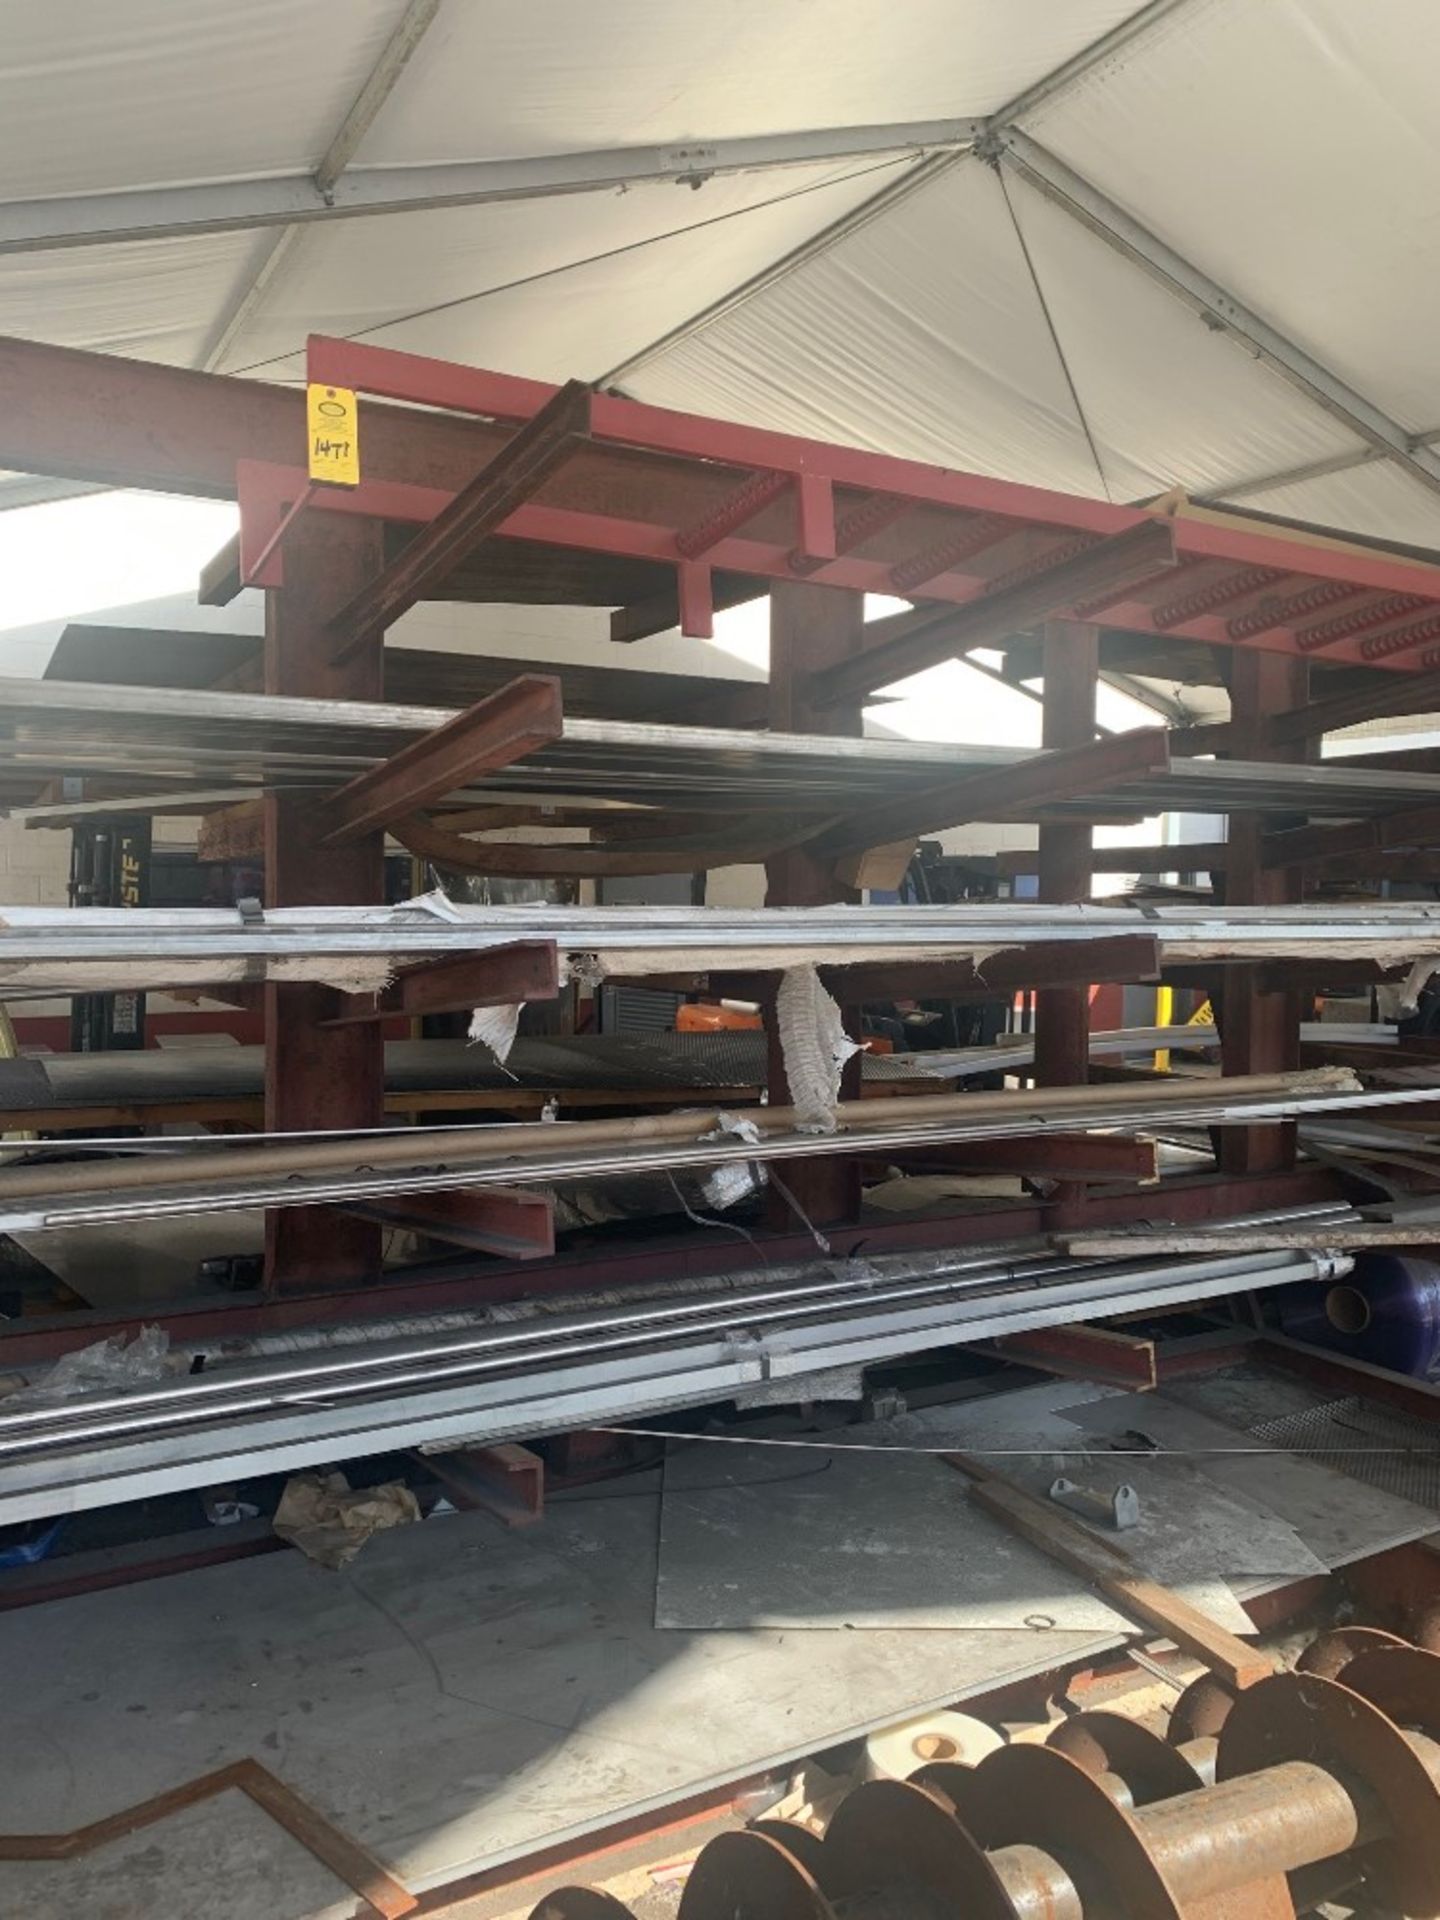 Lot (3) Pipe Racks and contents: Required Loading Fee $1500.00, Rigger-Norm Pavlish, Nebraska